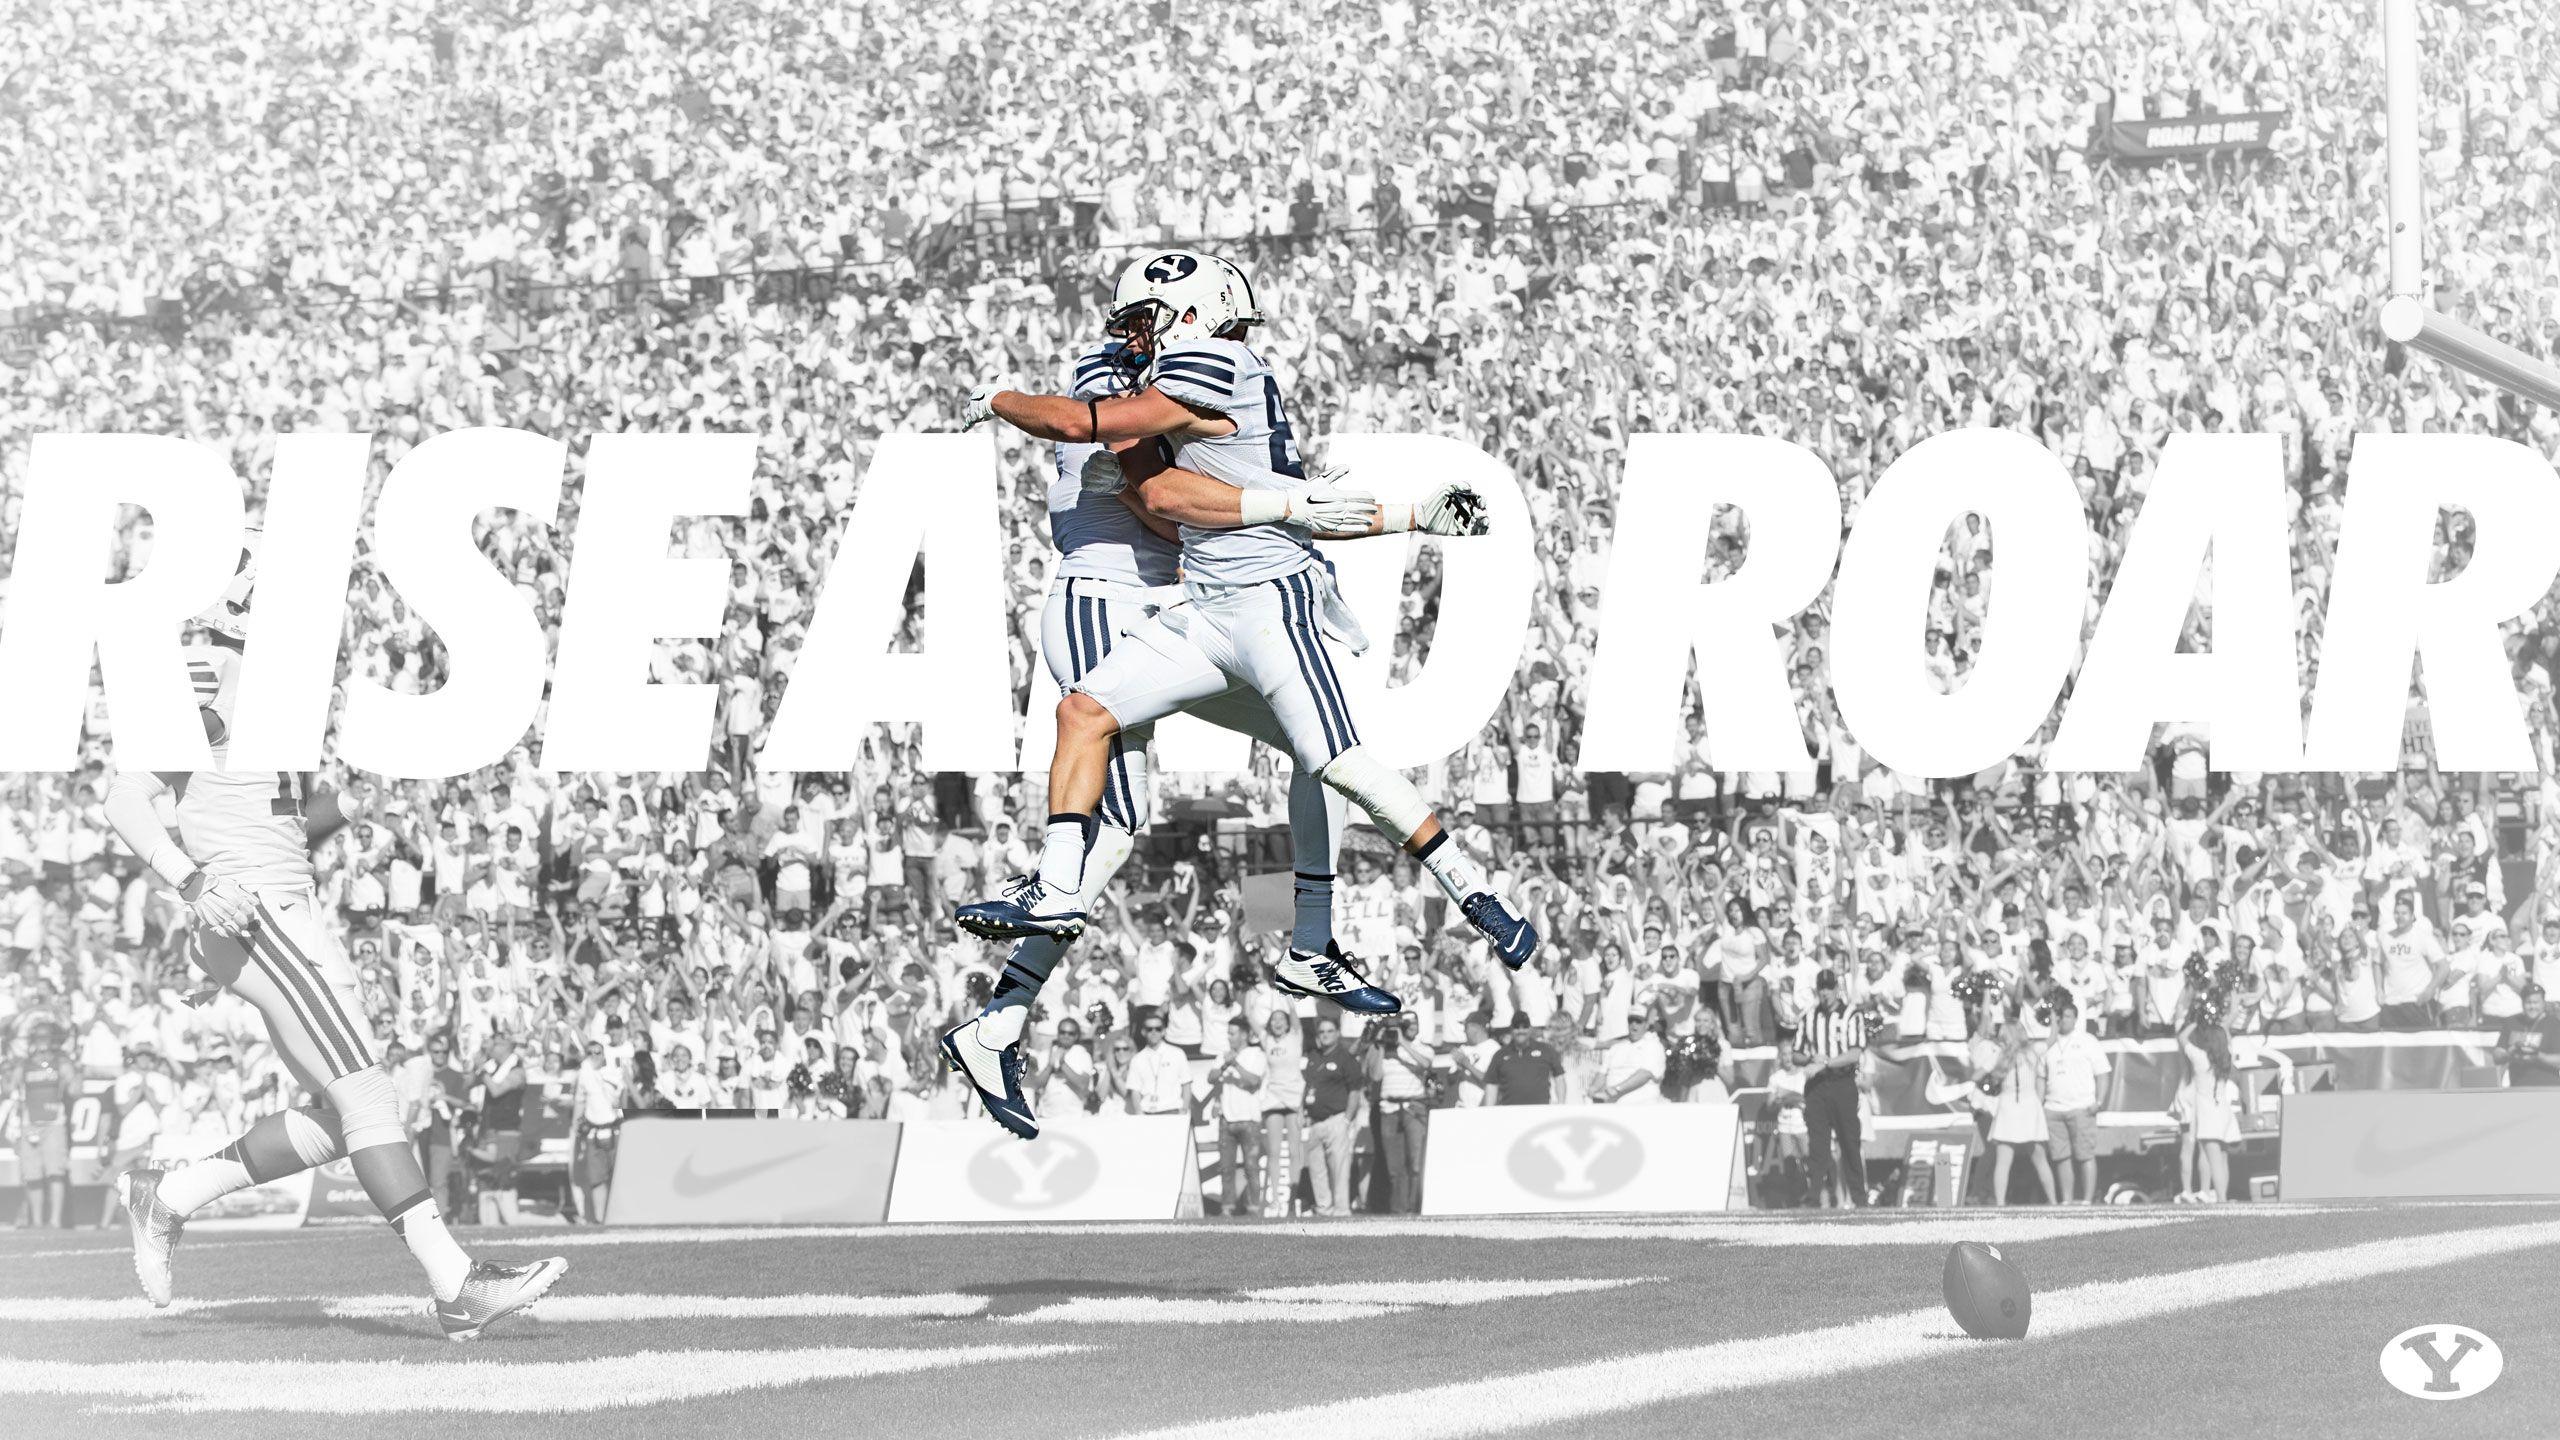 Most Recent BYU Wallpaper. BYU Sports Camps 5